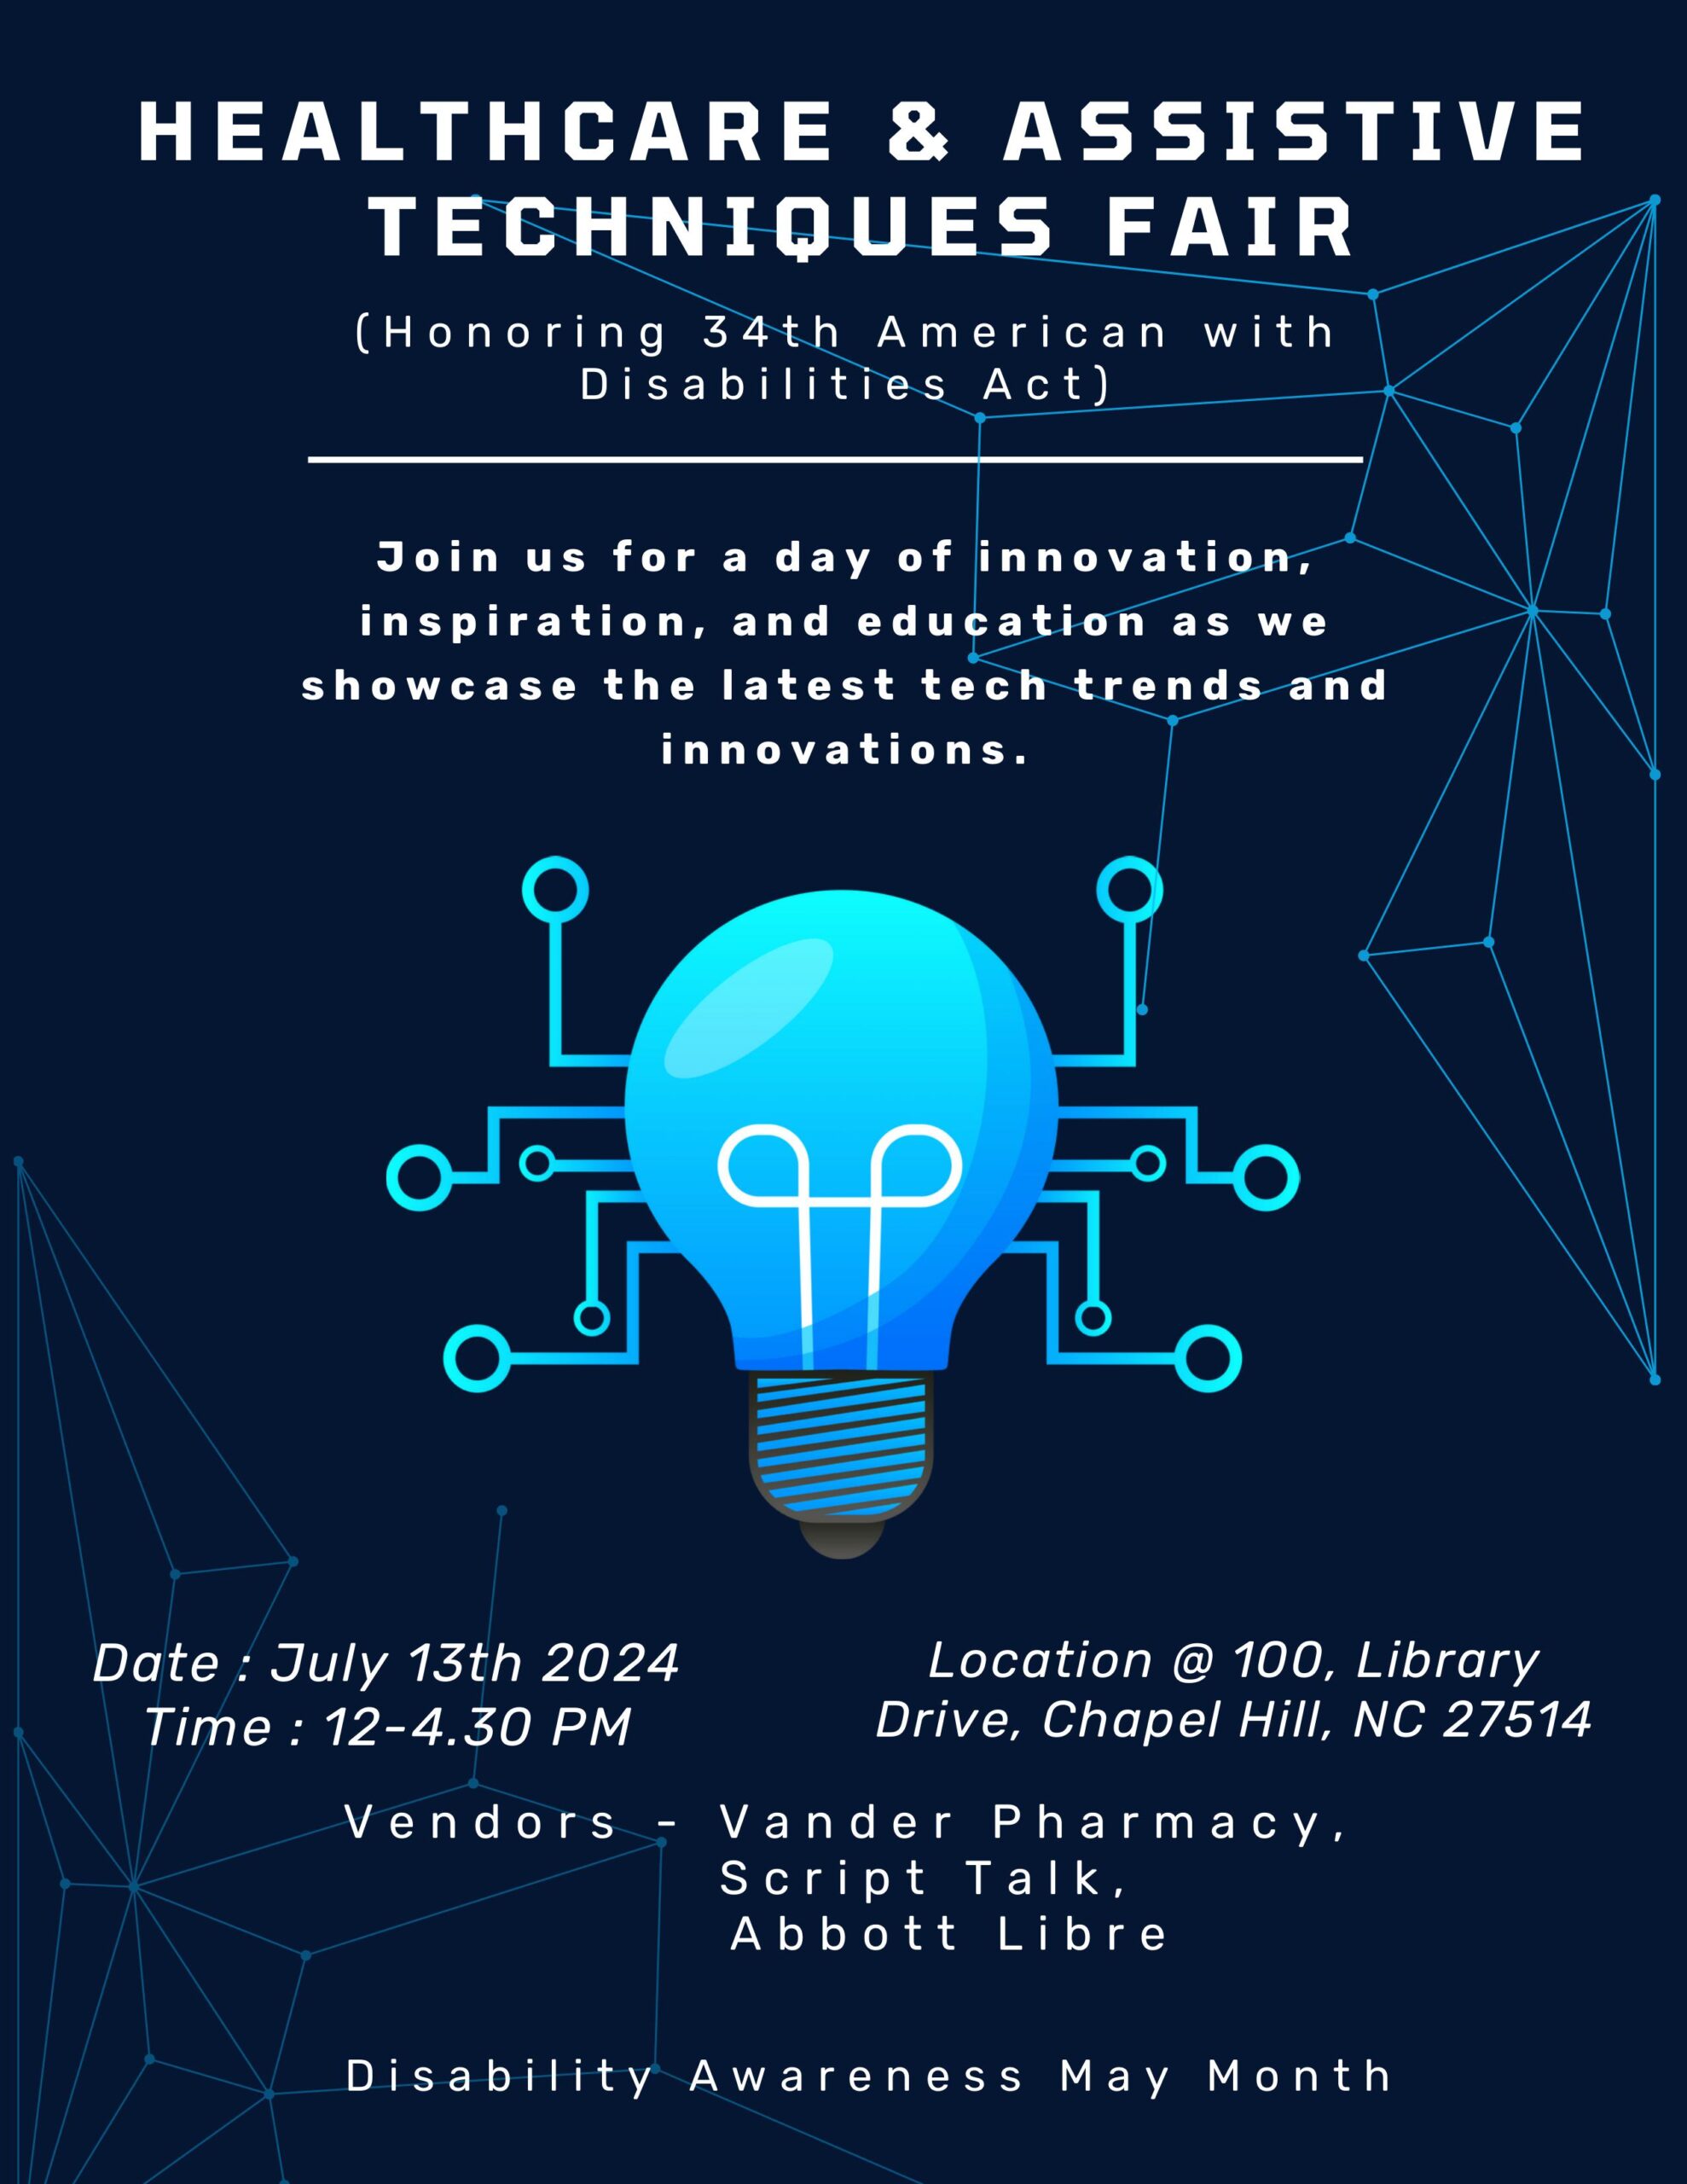 HEALTHCARE & ASSISTIVE TECHNIQUES FAIR (Honoring 34th American with Disabilities Act) Join us for a day of innovation, inspiration, and education as we showcase the latest tech trends and innovations. Date : July 13th 2024 Time : 12-4.30 PM Location @ 100, Library Drive, Chapel Hill, NC 27514. Vendors - Vander Pharmacy, Script Talk, Abbott Libre Disability Awareness May Month